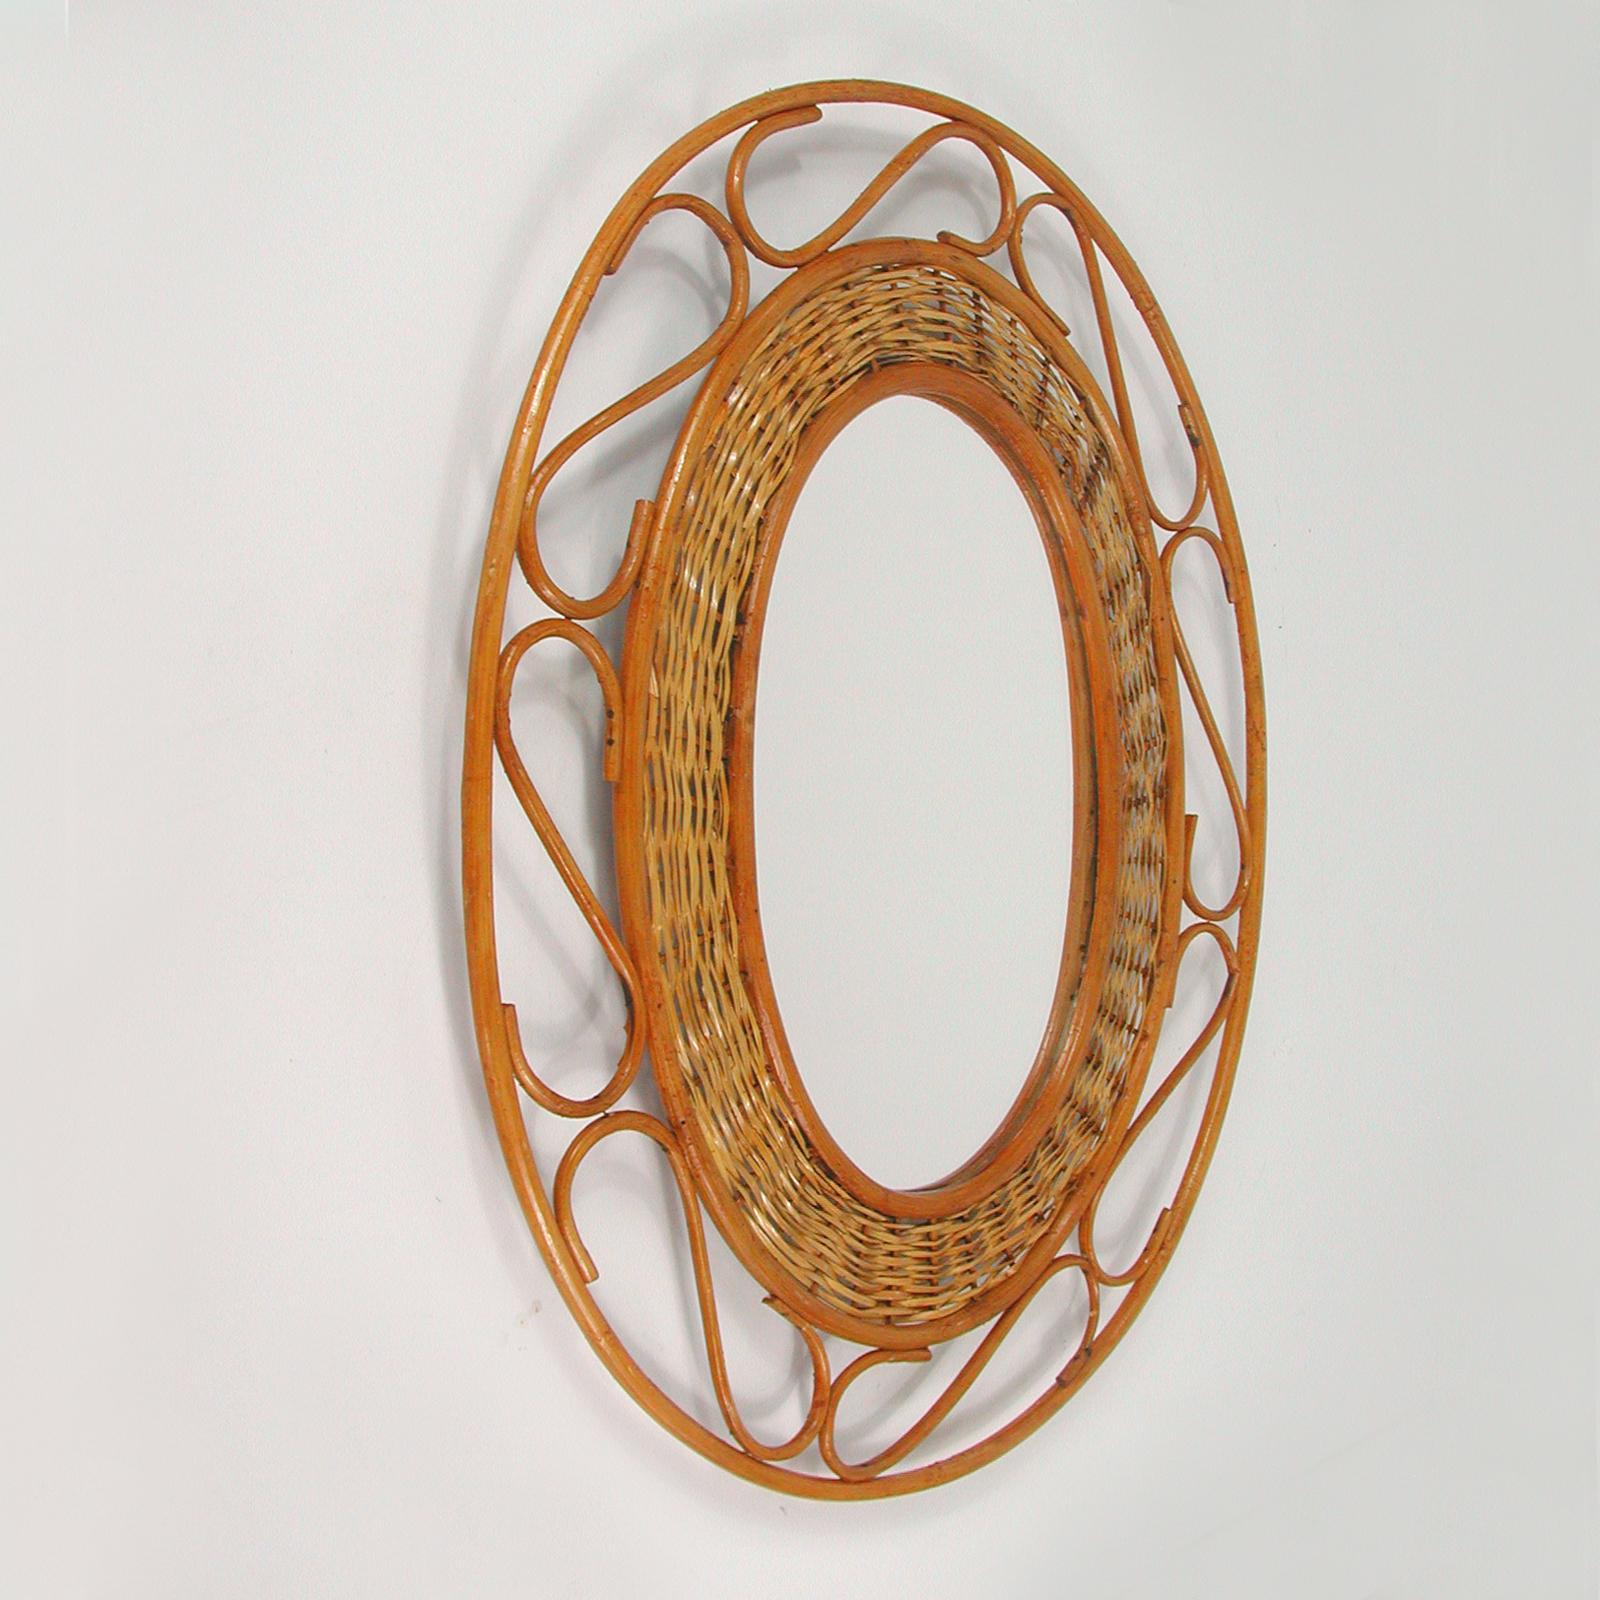 Midcentury Jean Royère Style French Riviera Rattan and Wicker Mirror, 1950s For Sale 1